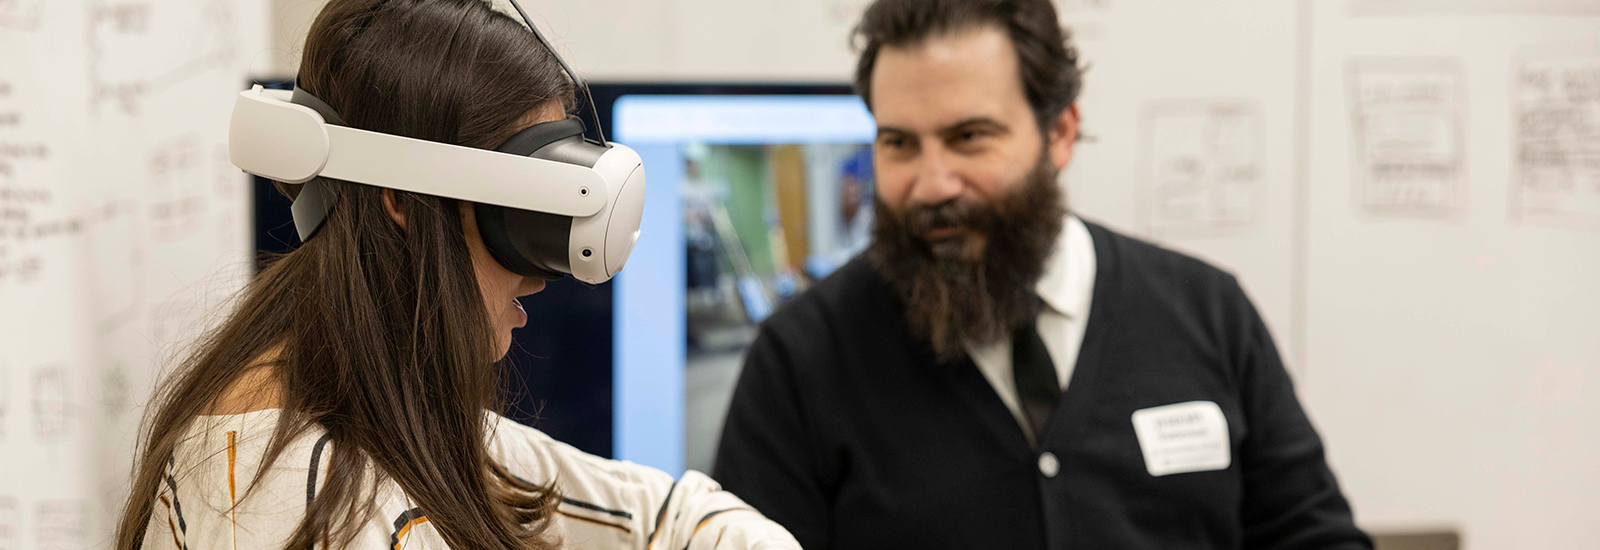 A woman stands in the foreground wearing a VR headset while a man helping to demo a project stands in the background, directing her.